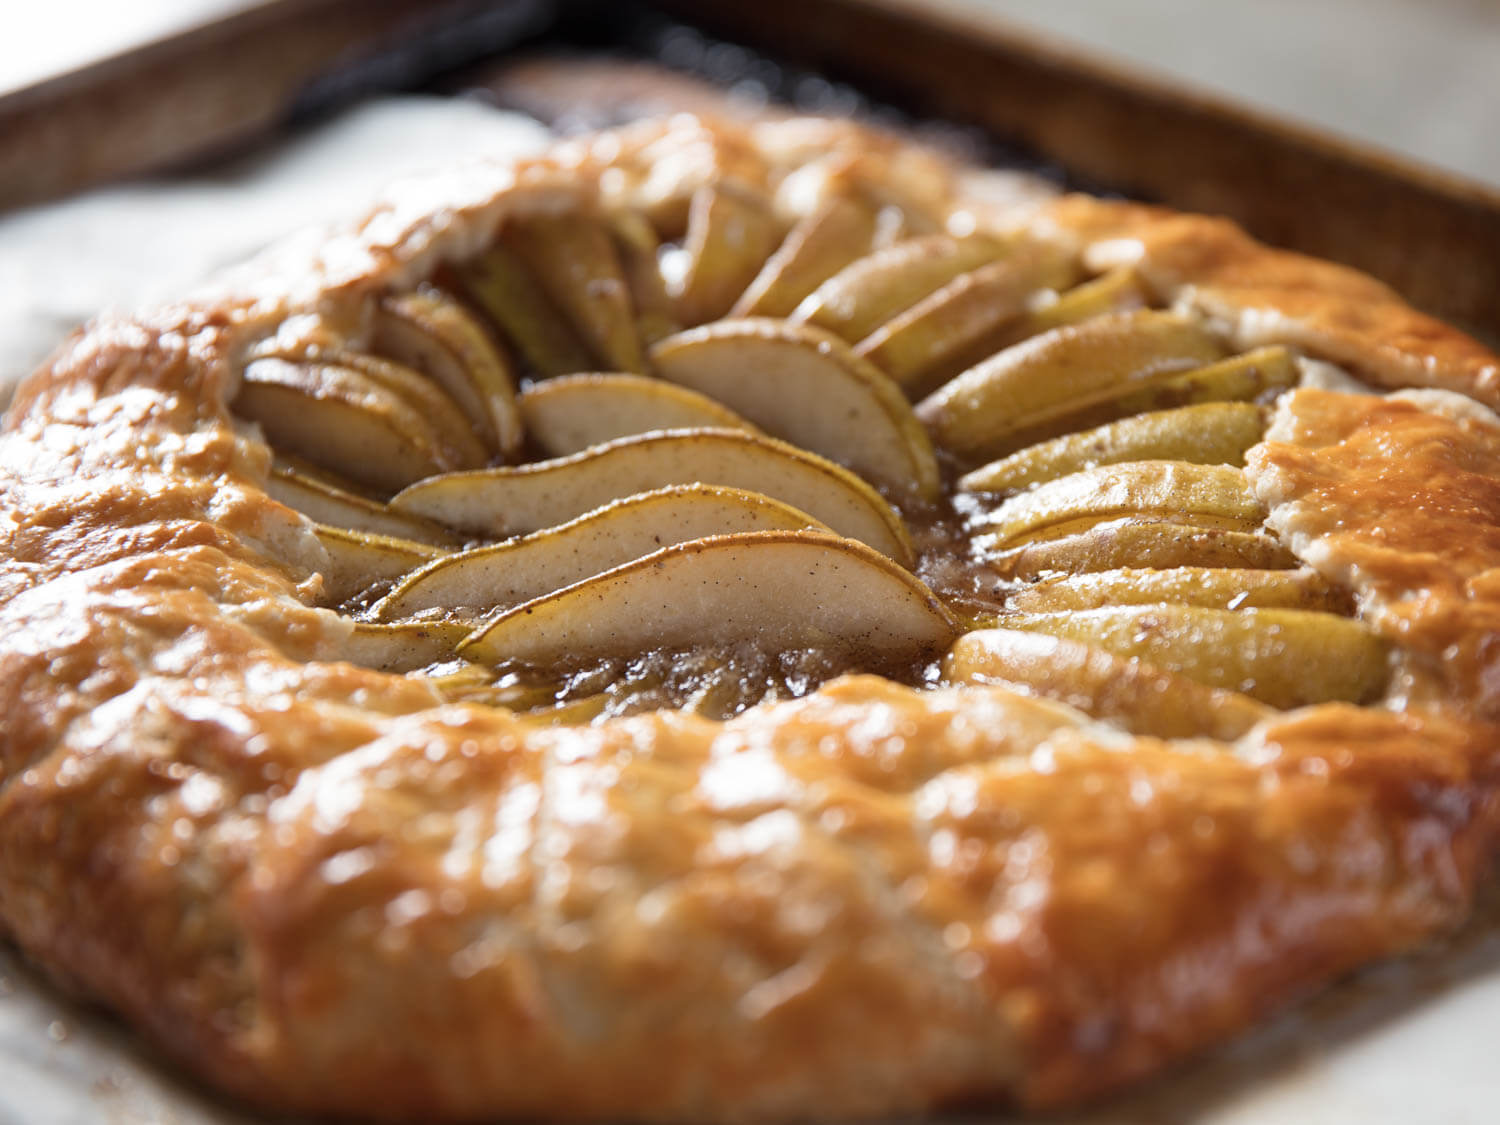 How to Make a Pear Galette With Better Pear Flavor